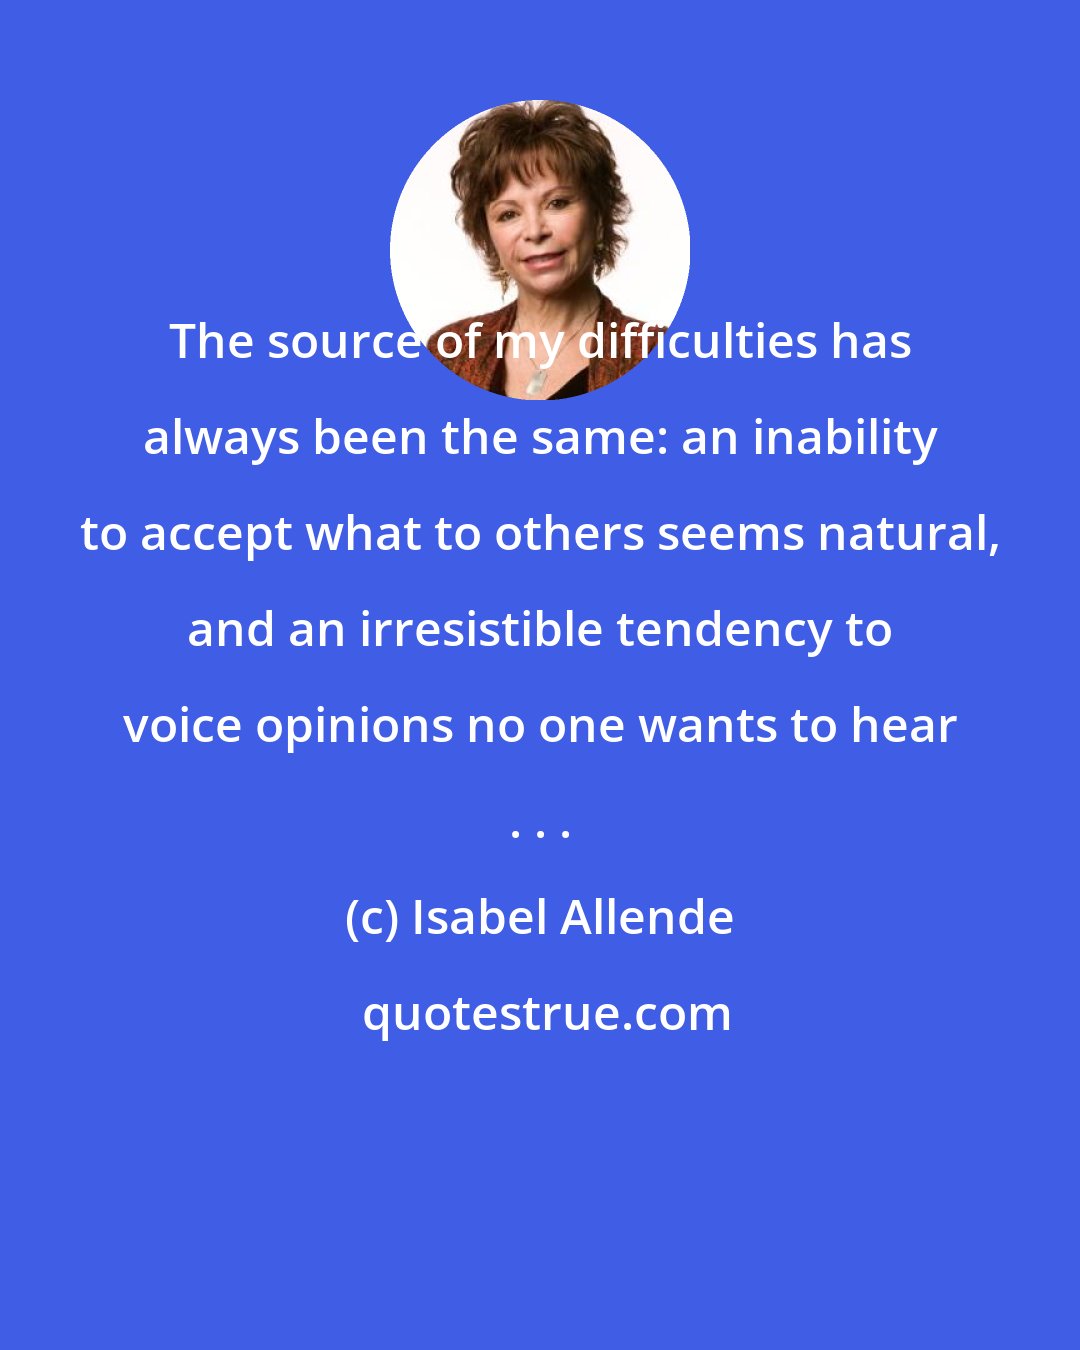 Isabel Allende: The source of my difficulties has always been the same: an inability to accept what to others seems natural, and an irresistible tendency to voice opinions no one wants to hear . . .